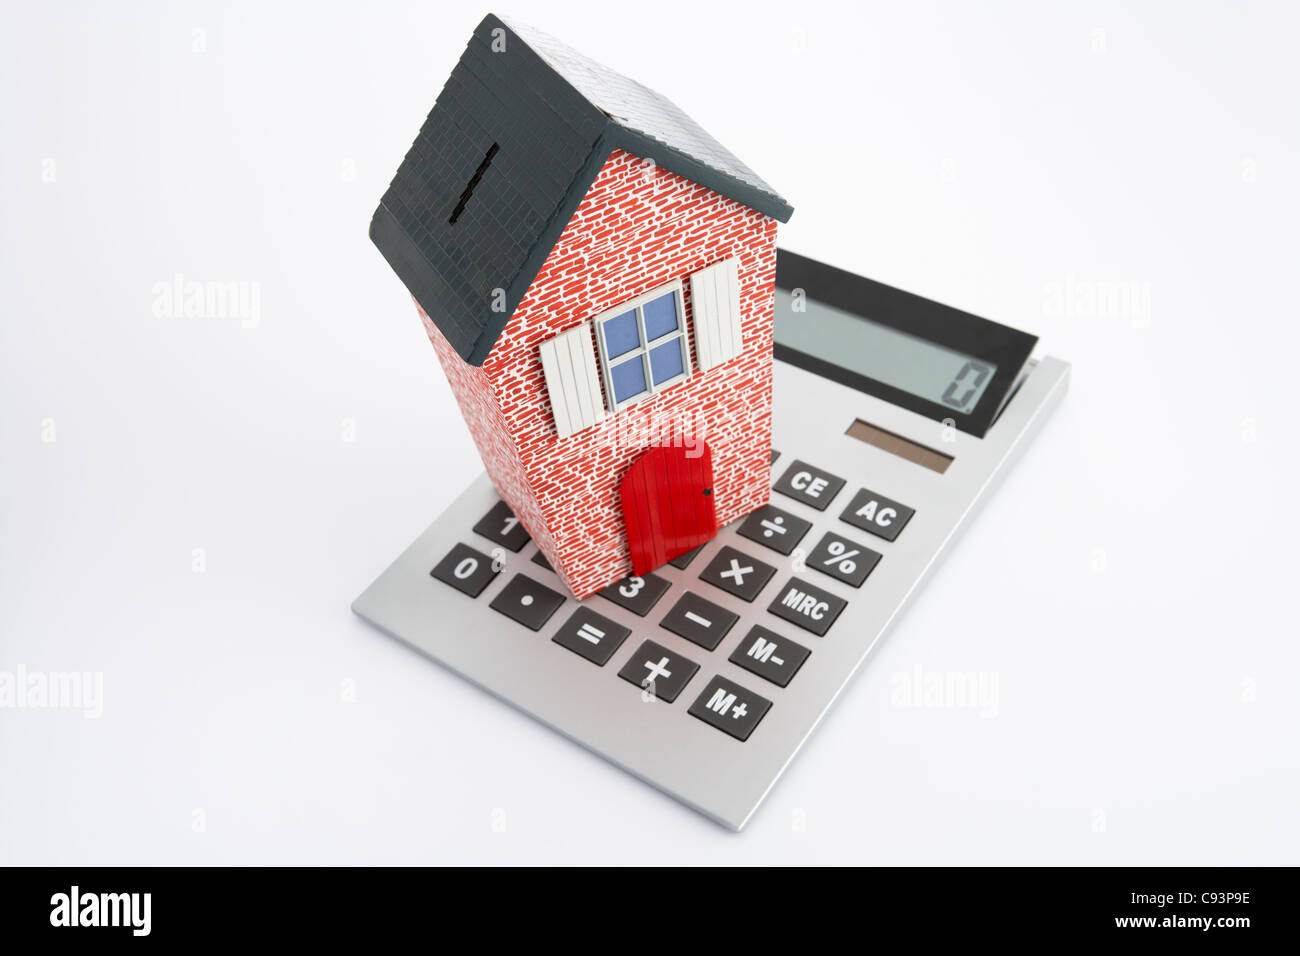 Model house and calculator Stock Photo